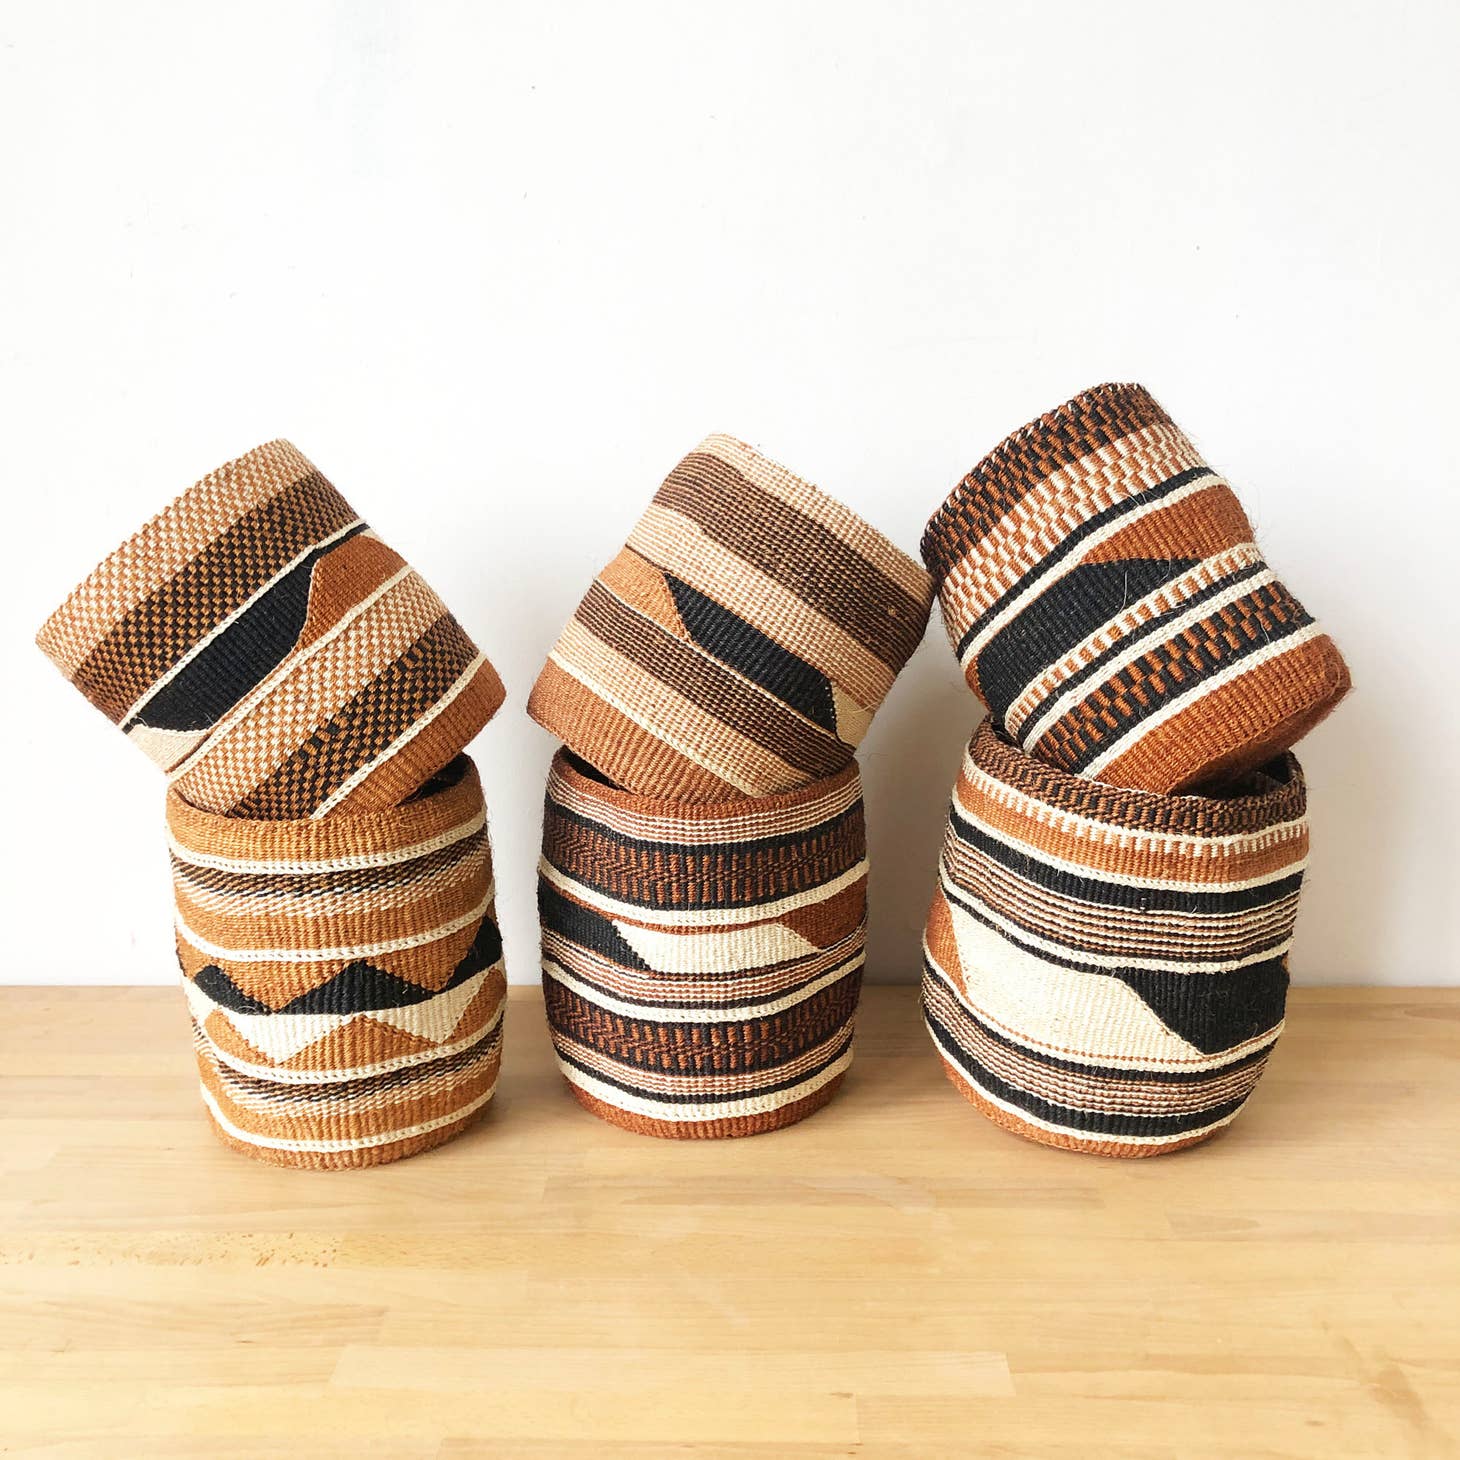 These sisal, woven baskets are handmade by a weaving cooperative in southeastern Kenya.